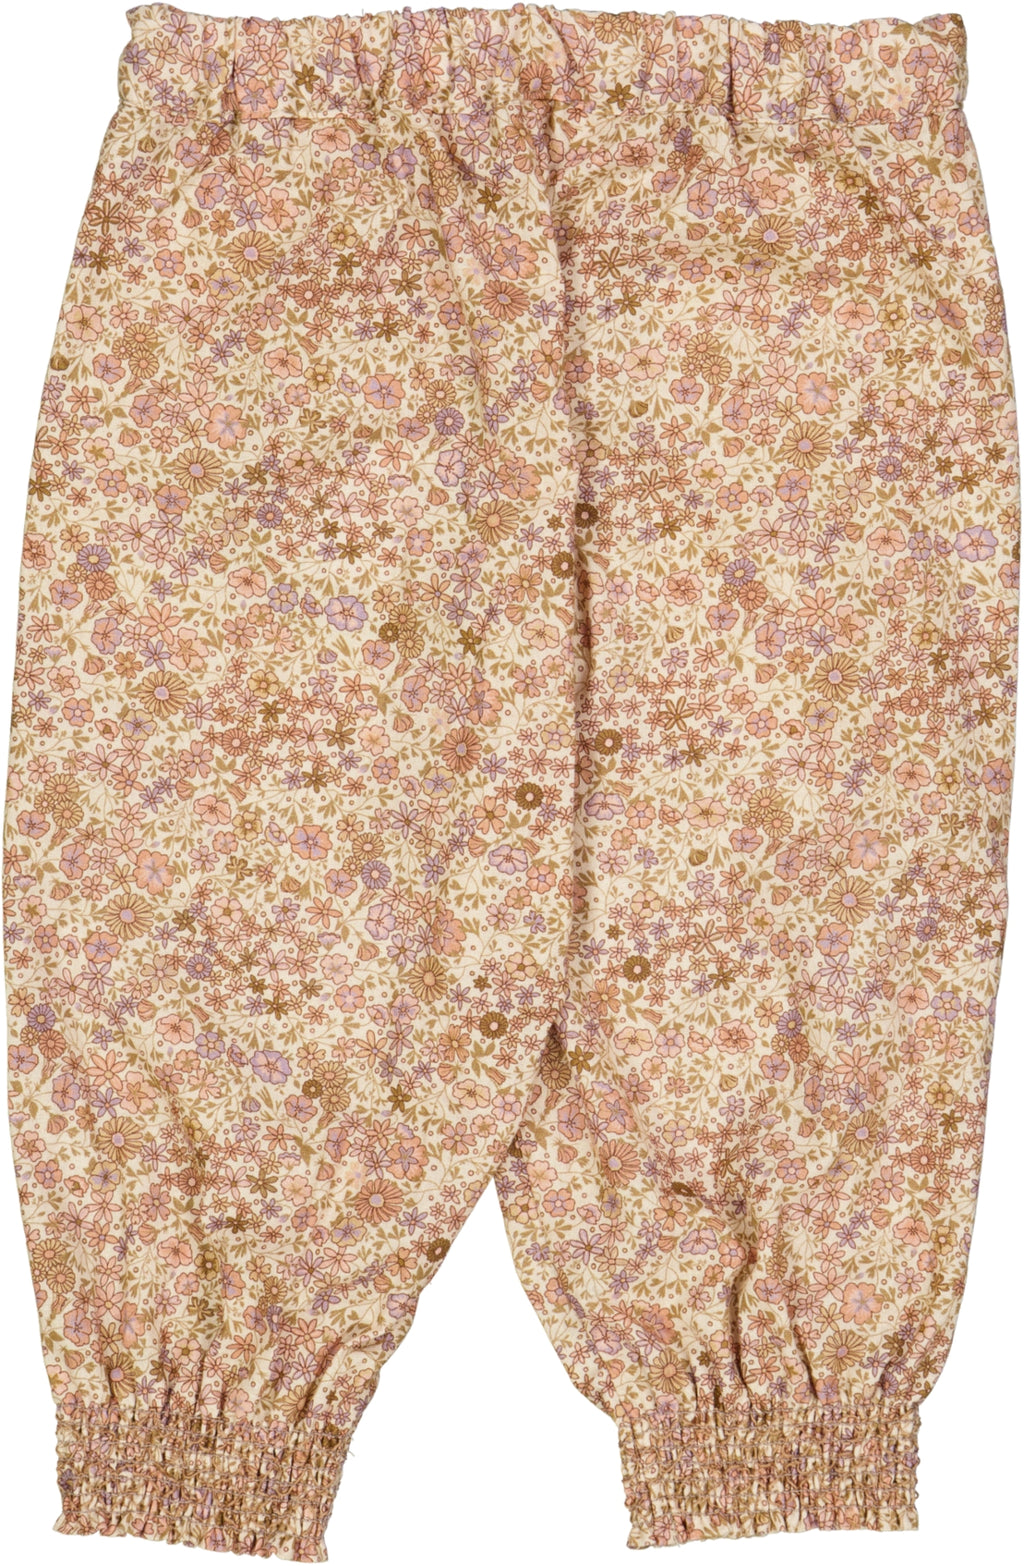 Wheat Trousers Trousers Sara clam flowers